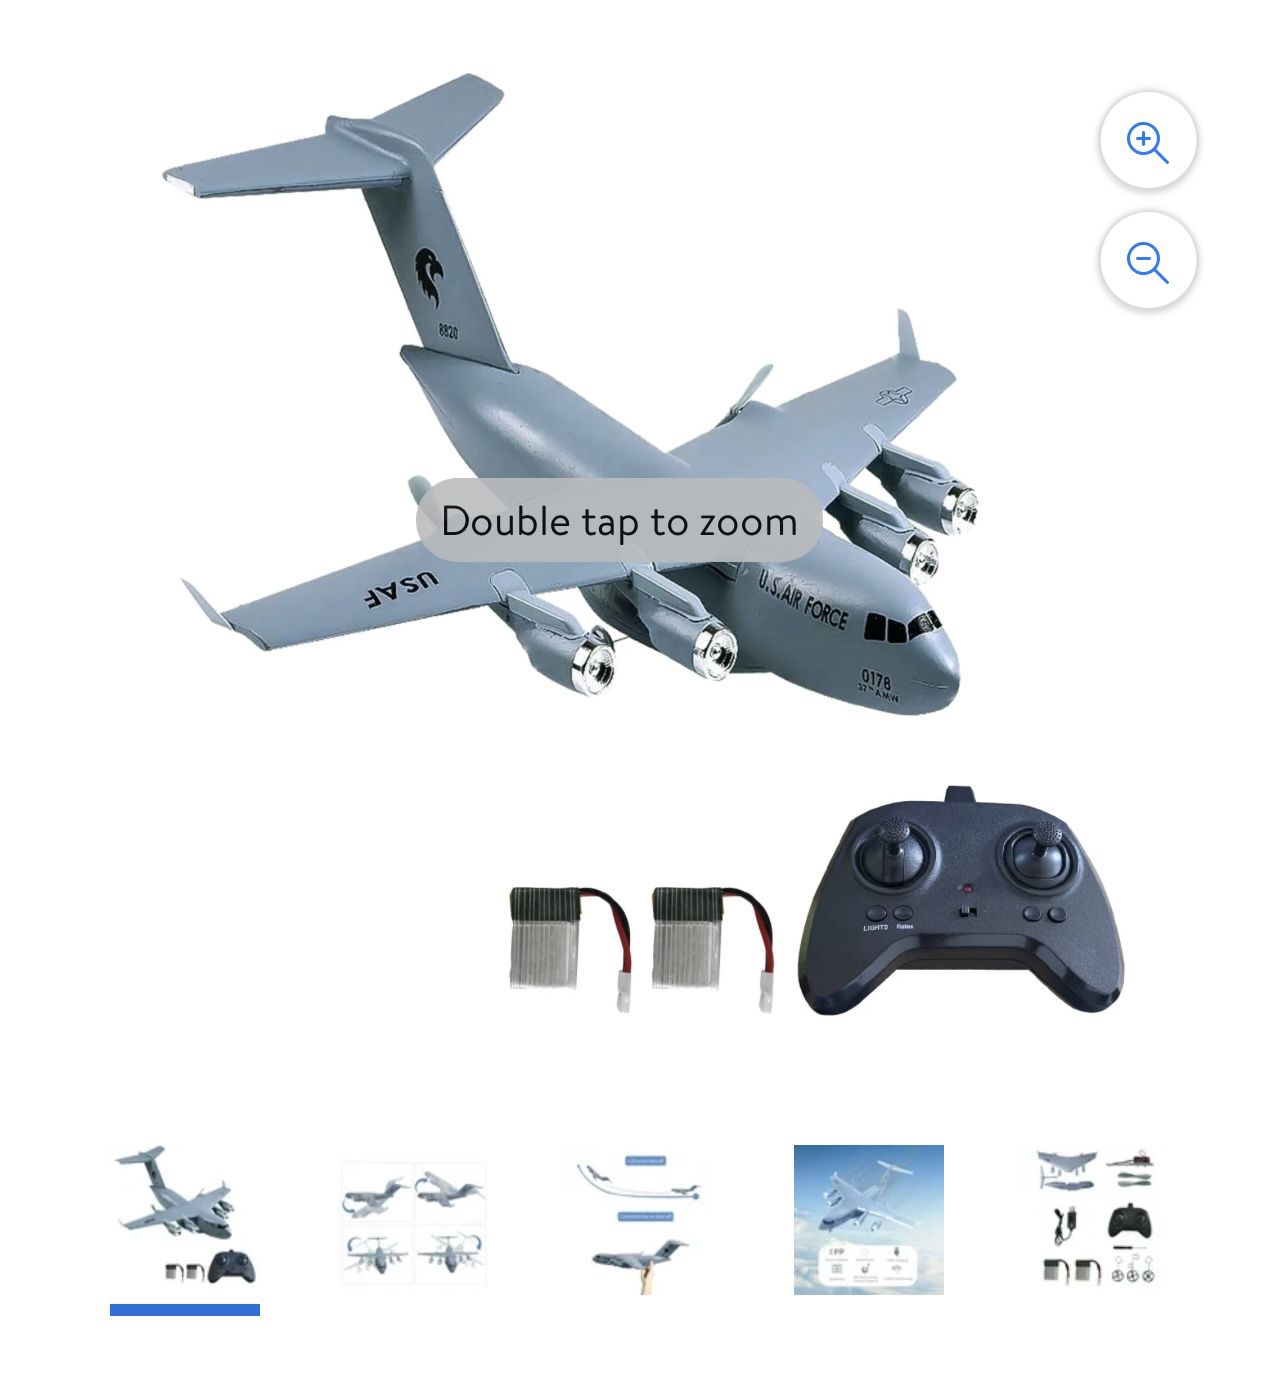 Gytobytle RC Plane C-17 Remote Control Airplane Transport Ready to Fly 2 CH Toy for Kids Boys (Grey